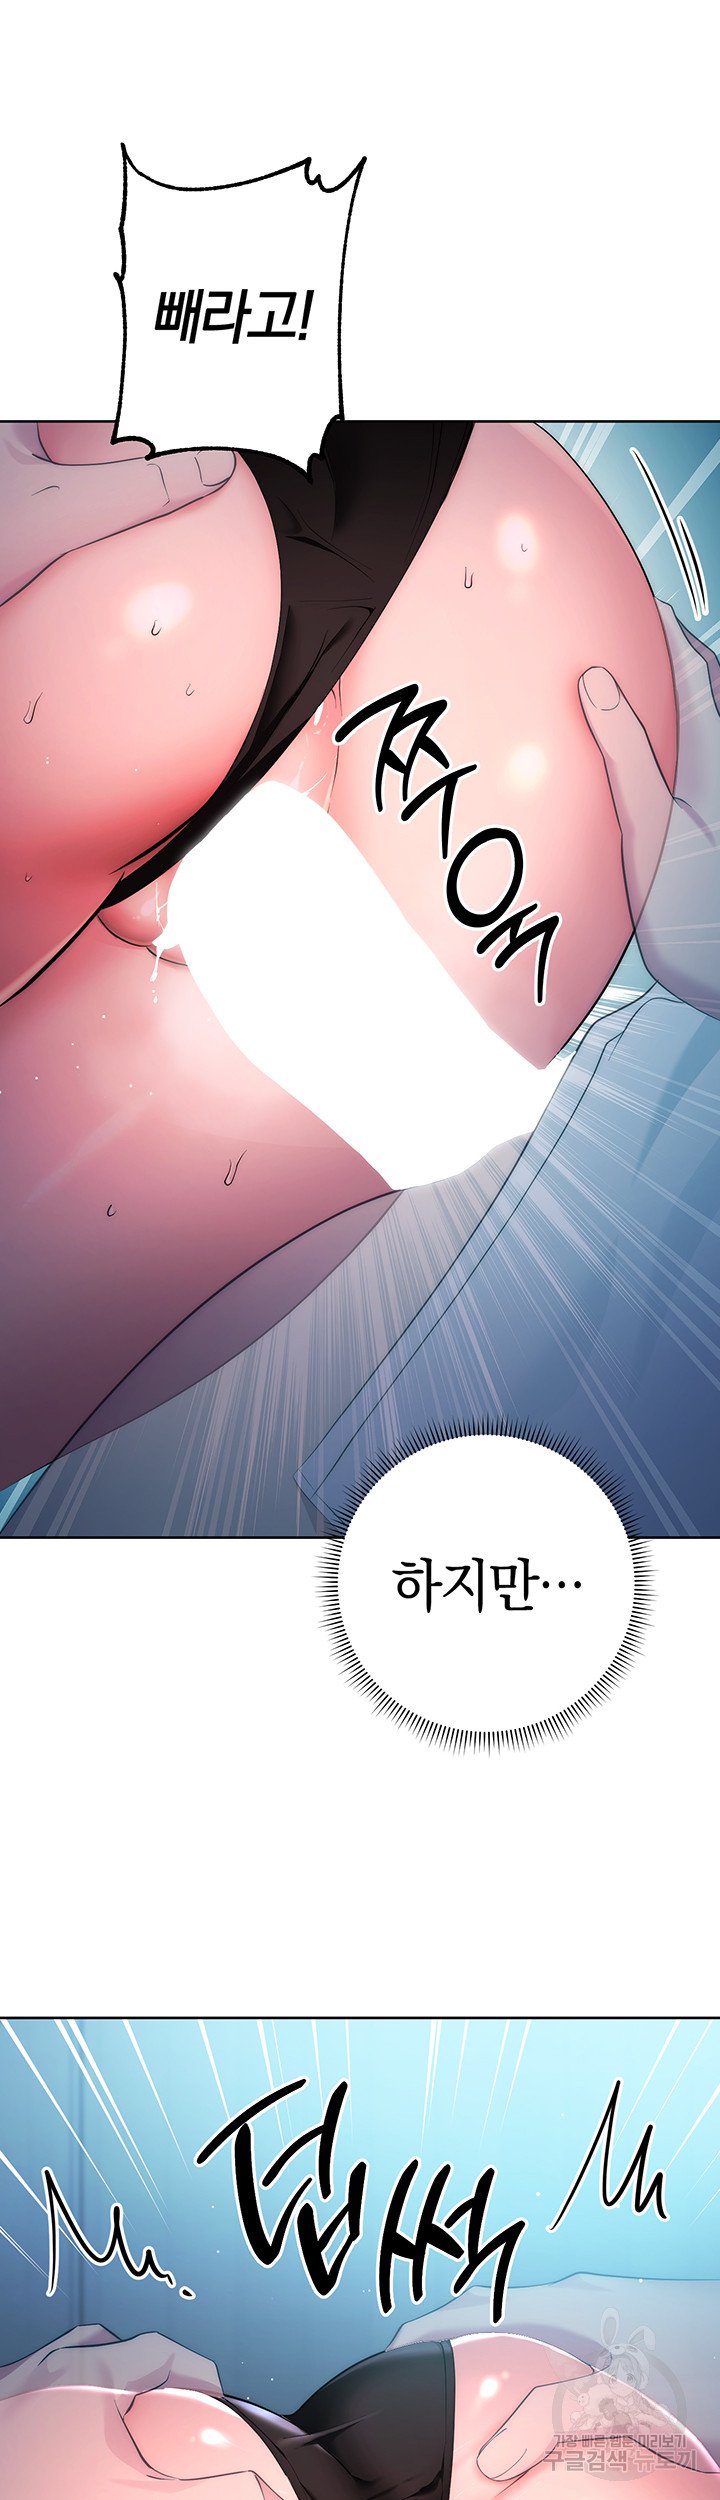 outsider-the-invisible-man-raw-chap-3-23